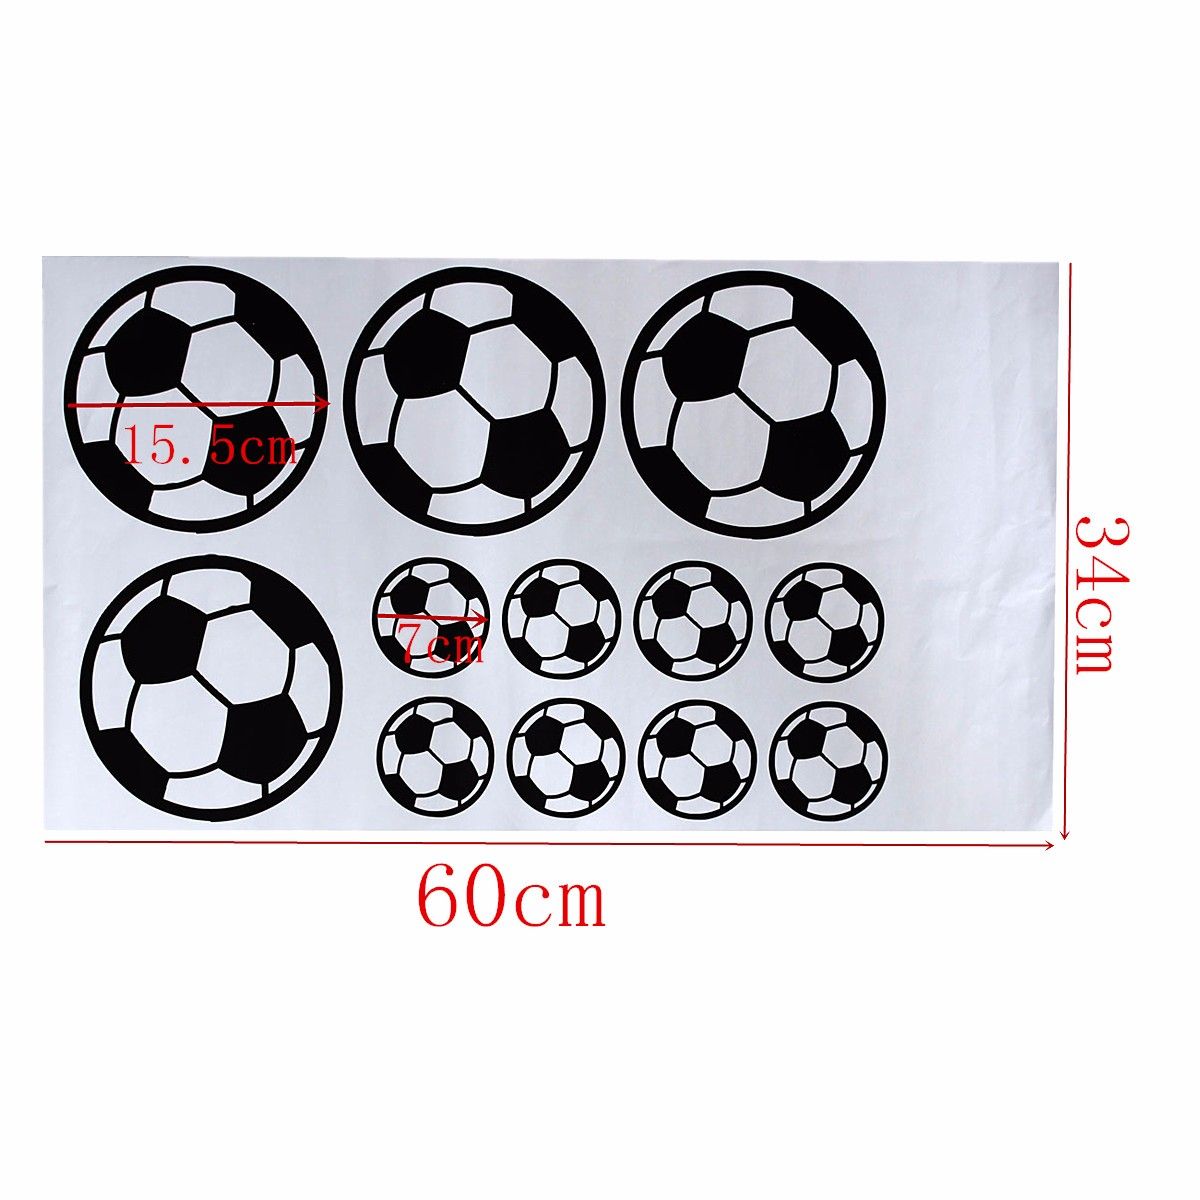 12PcsSet-Football-Soccer-Wall-Stickers-Children-Nursery-Kids-Room-Decals-Gift-Home-Decorations-1470248